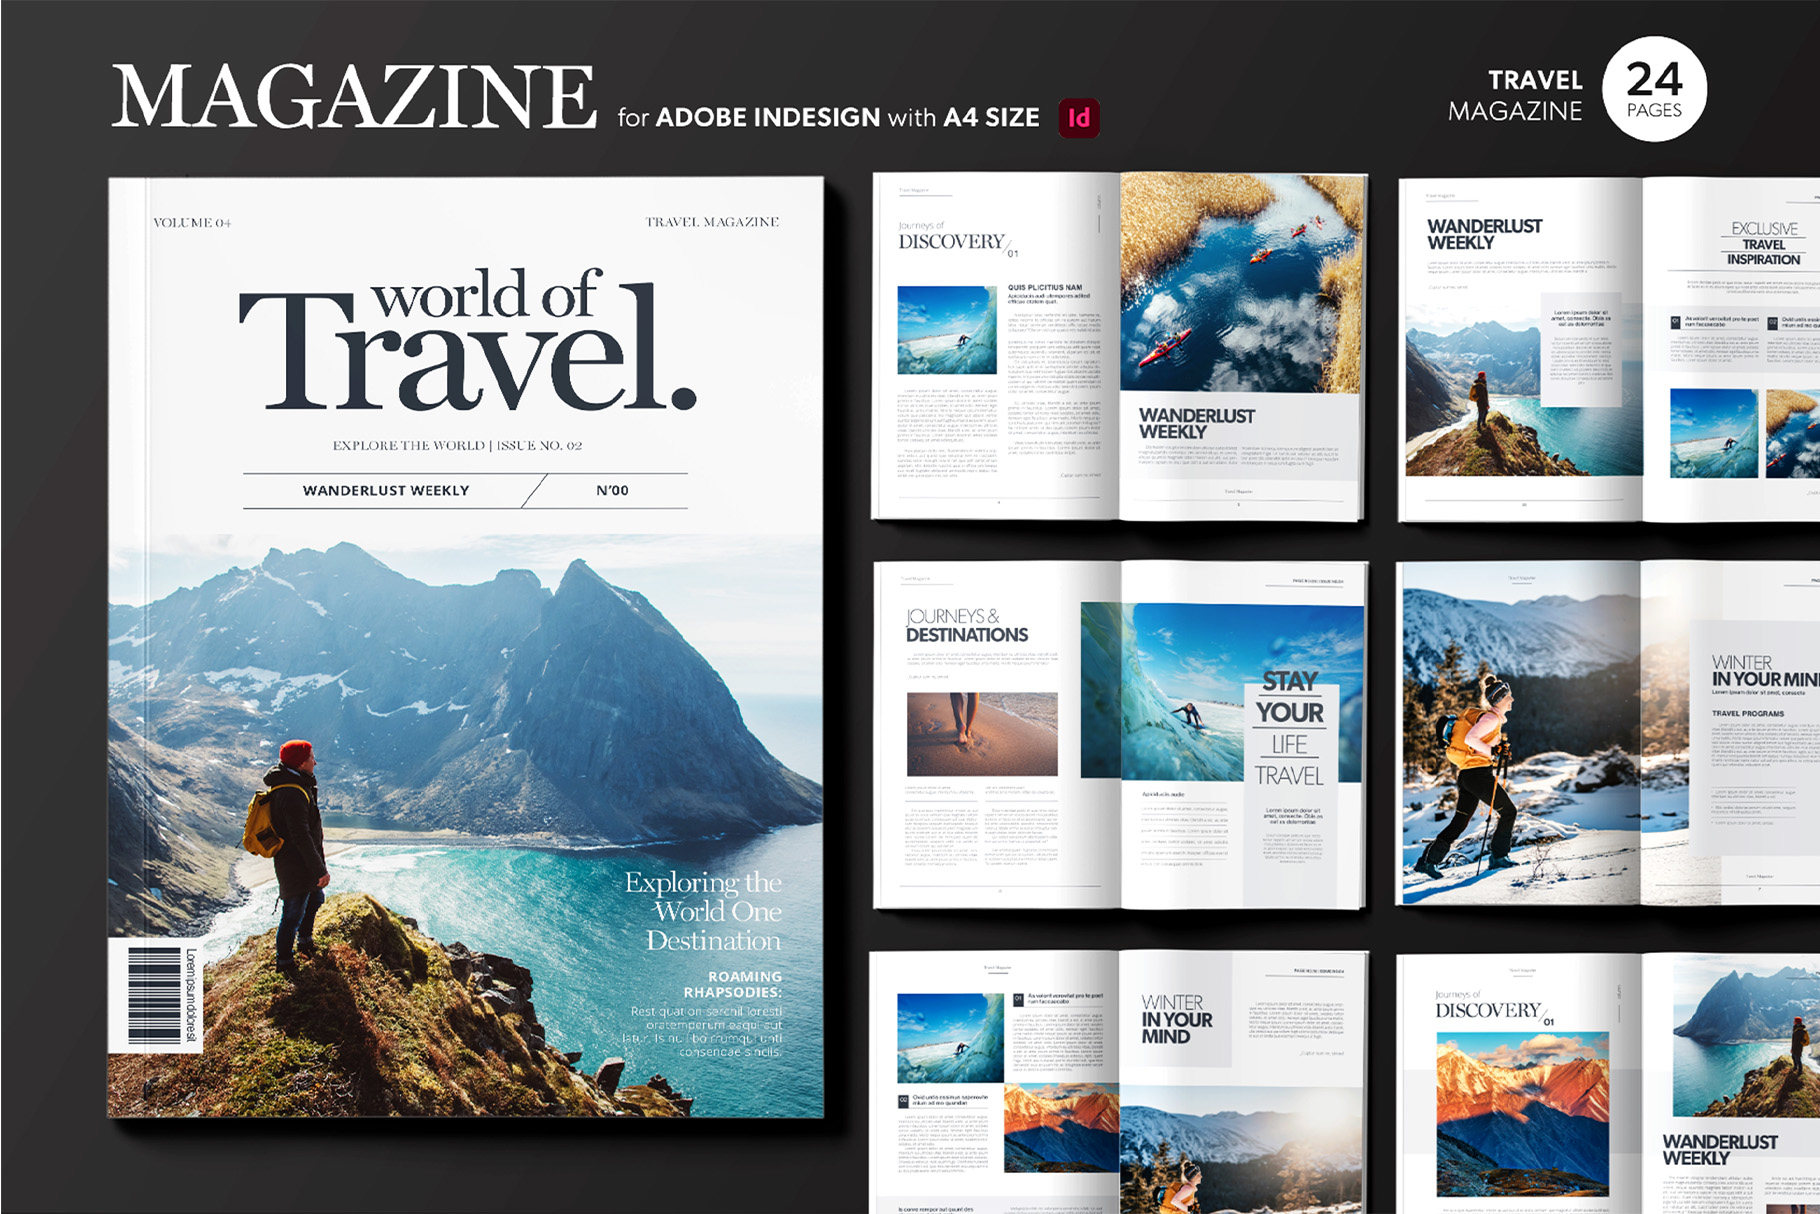 Travel Magazine Template Layout (INDD Format)